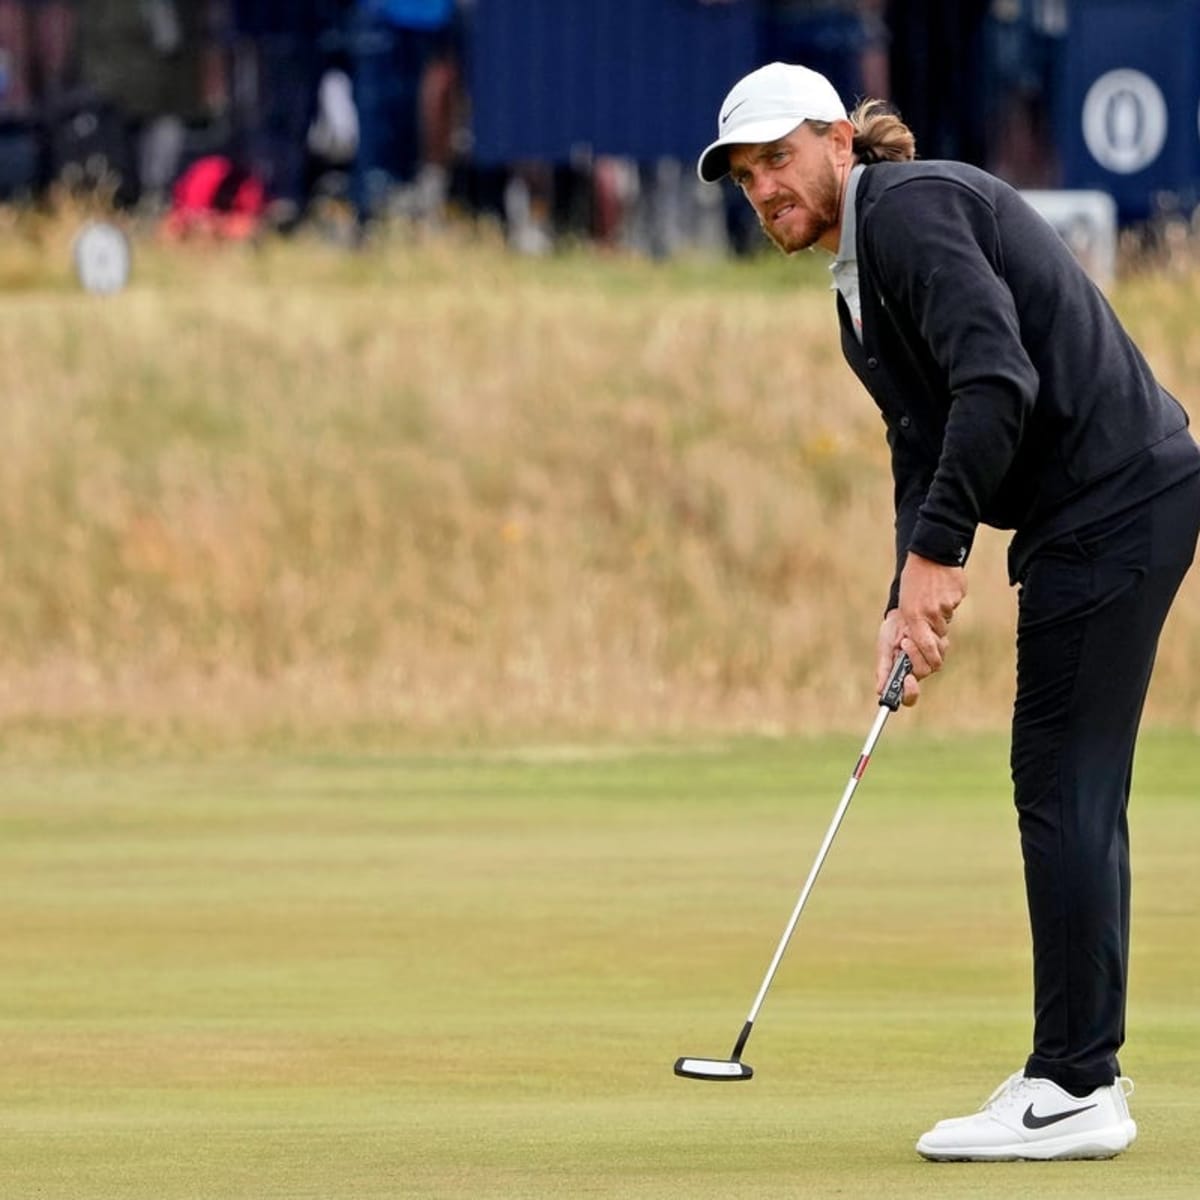 Tommy Fleetwood at the Arnold Palmer Invitational presented by Mastercard Live Stream, TV Channel March 2 - 5 - How to Watch and Stream Major League and College Sports